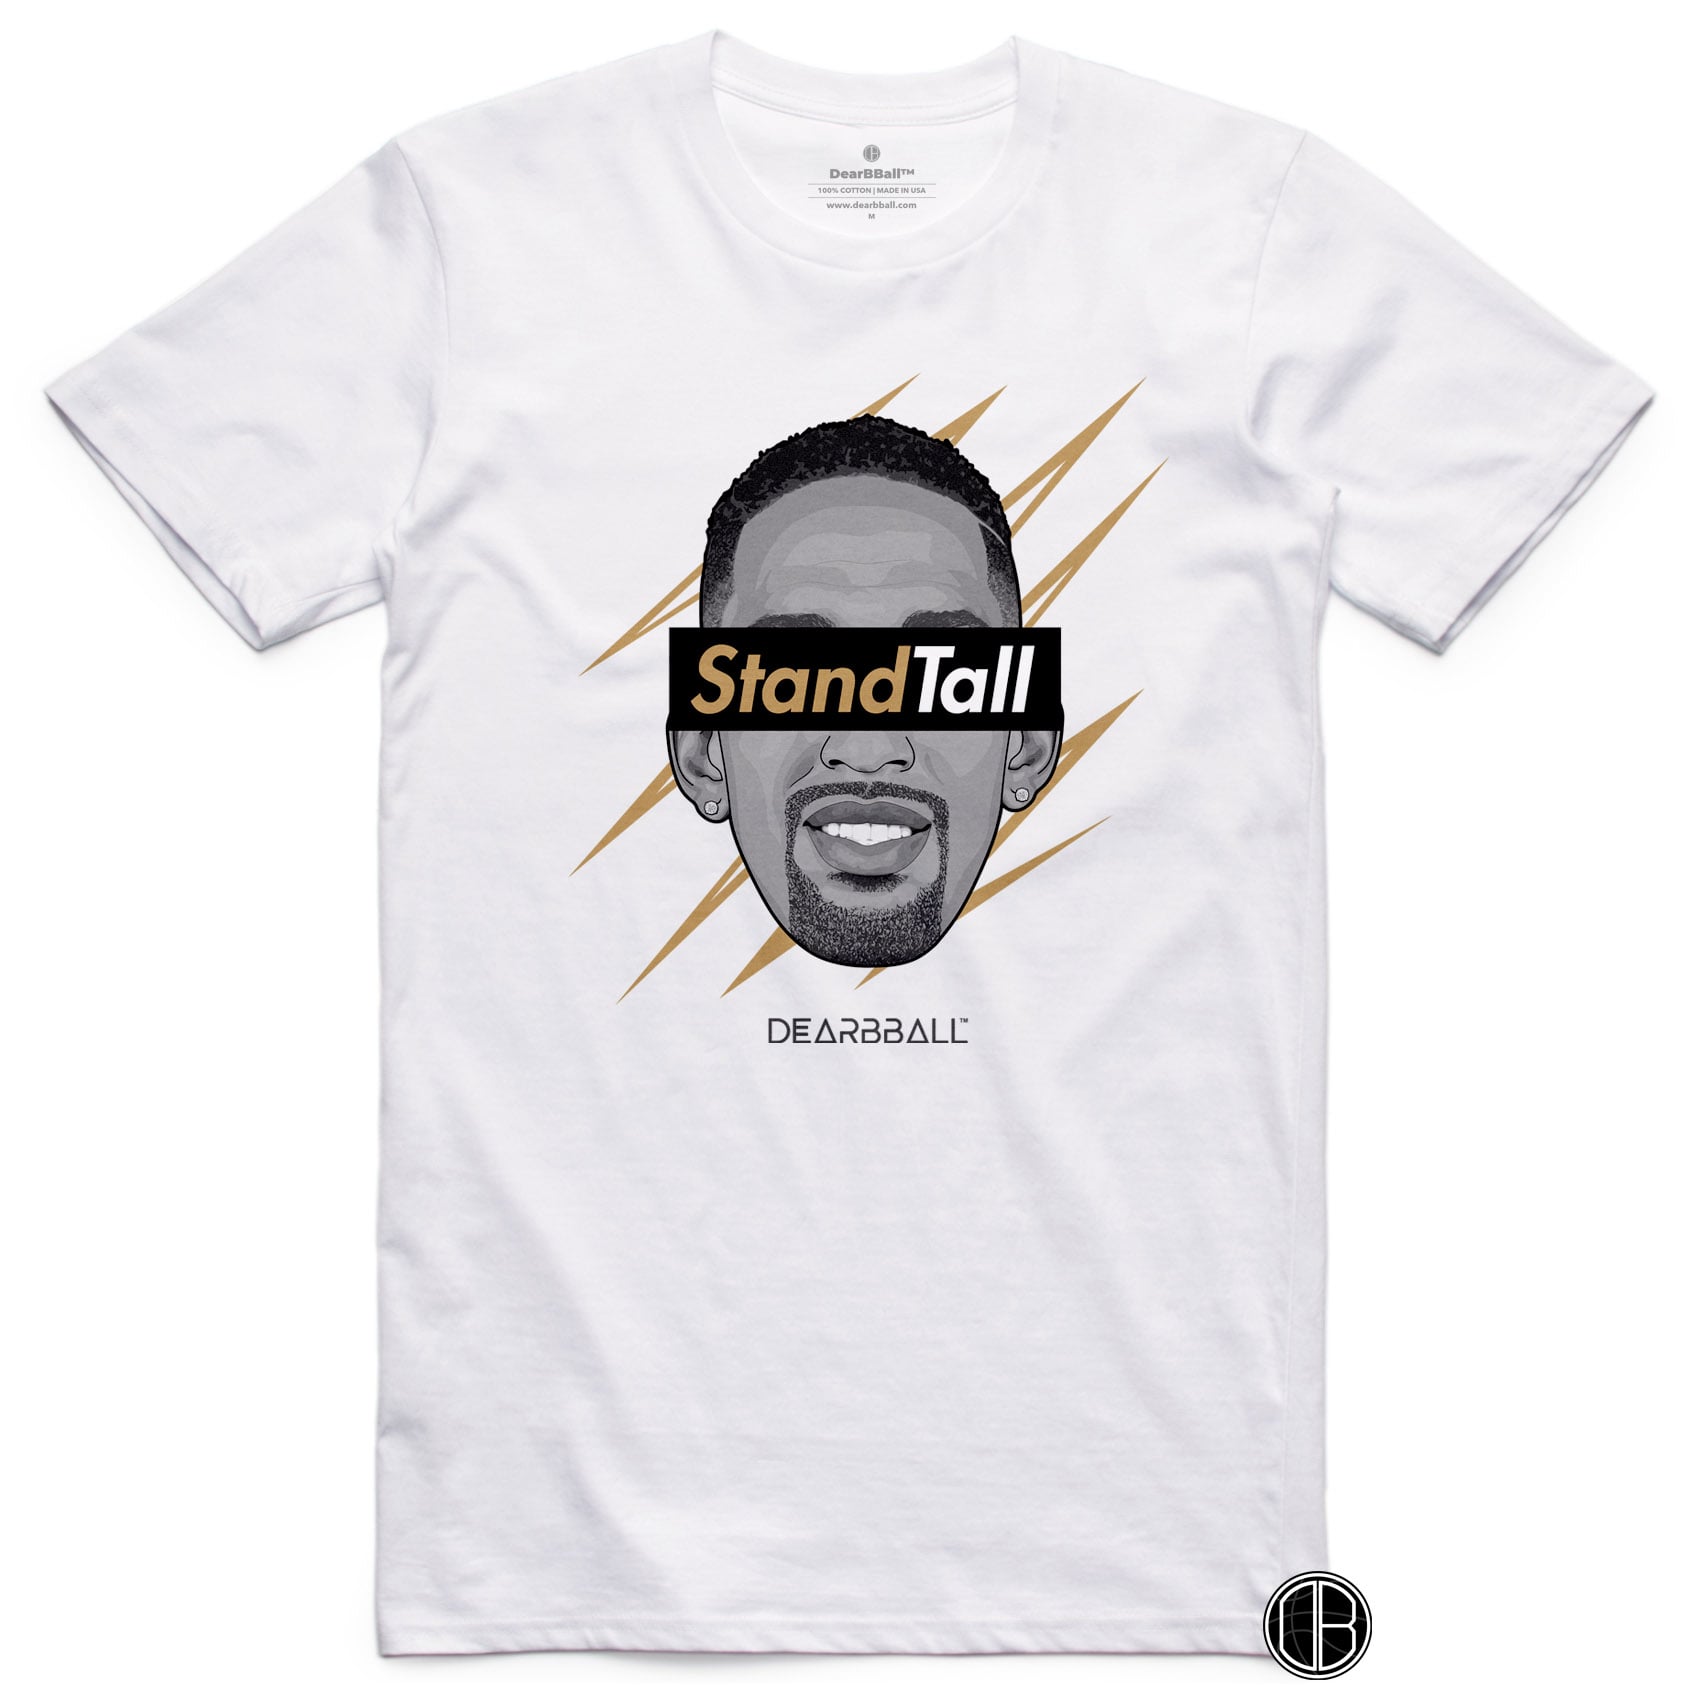 DearBBall T-Shirt - StandTall LifeStyle Bicolor Edition